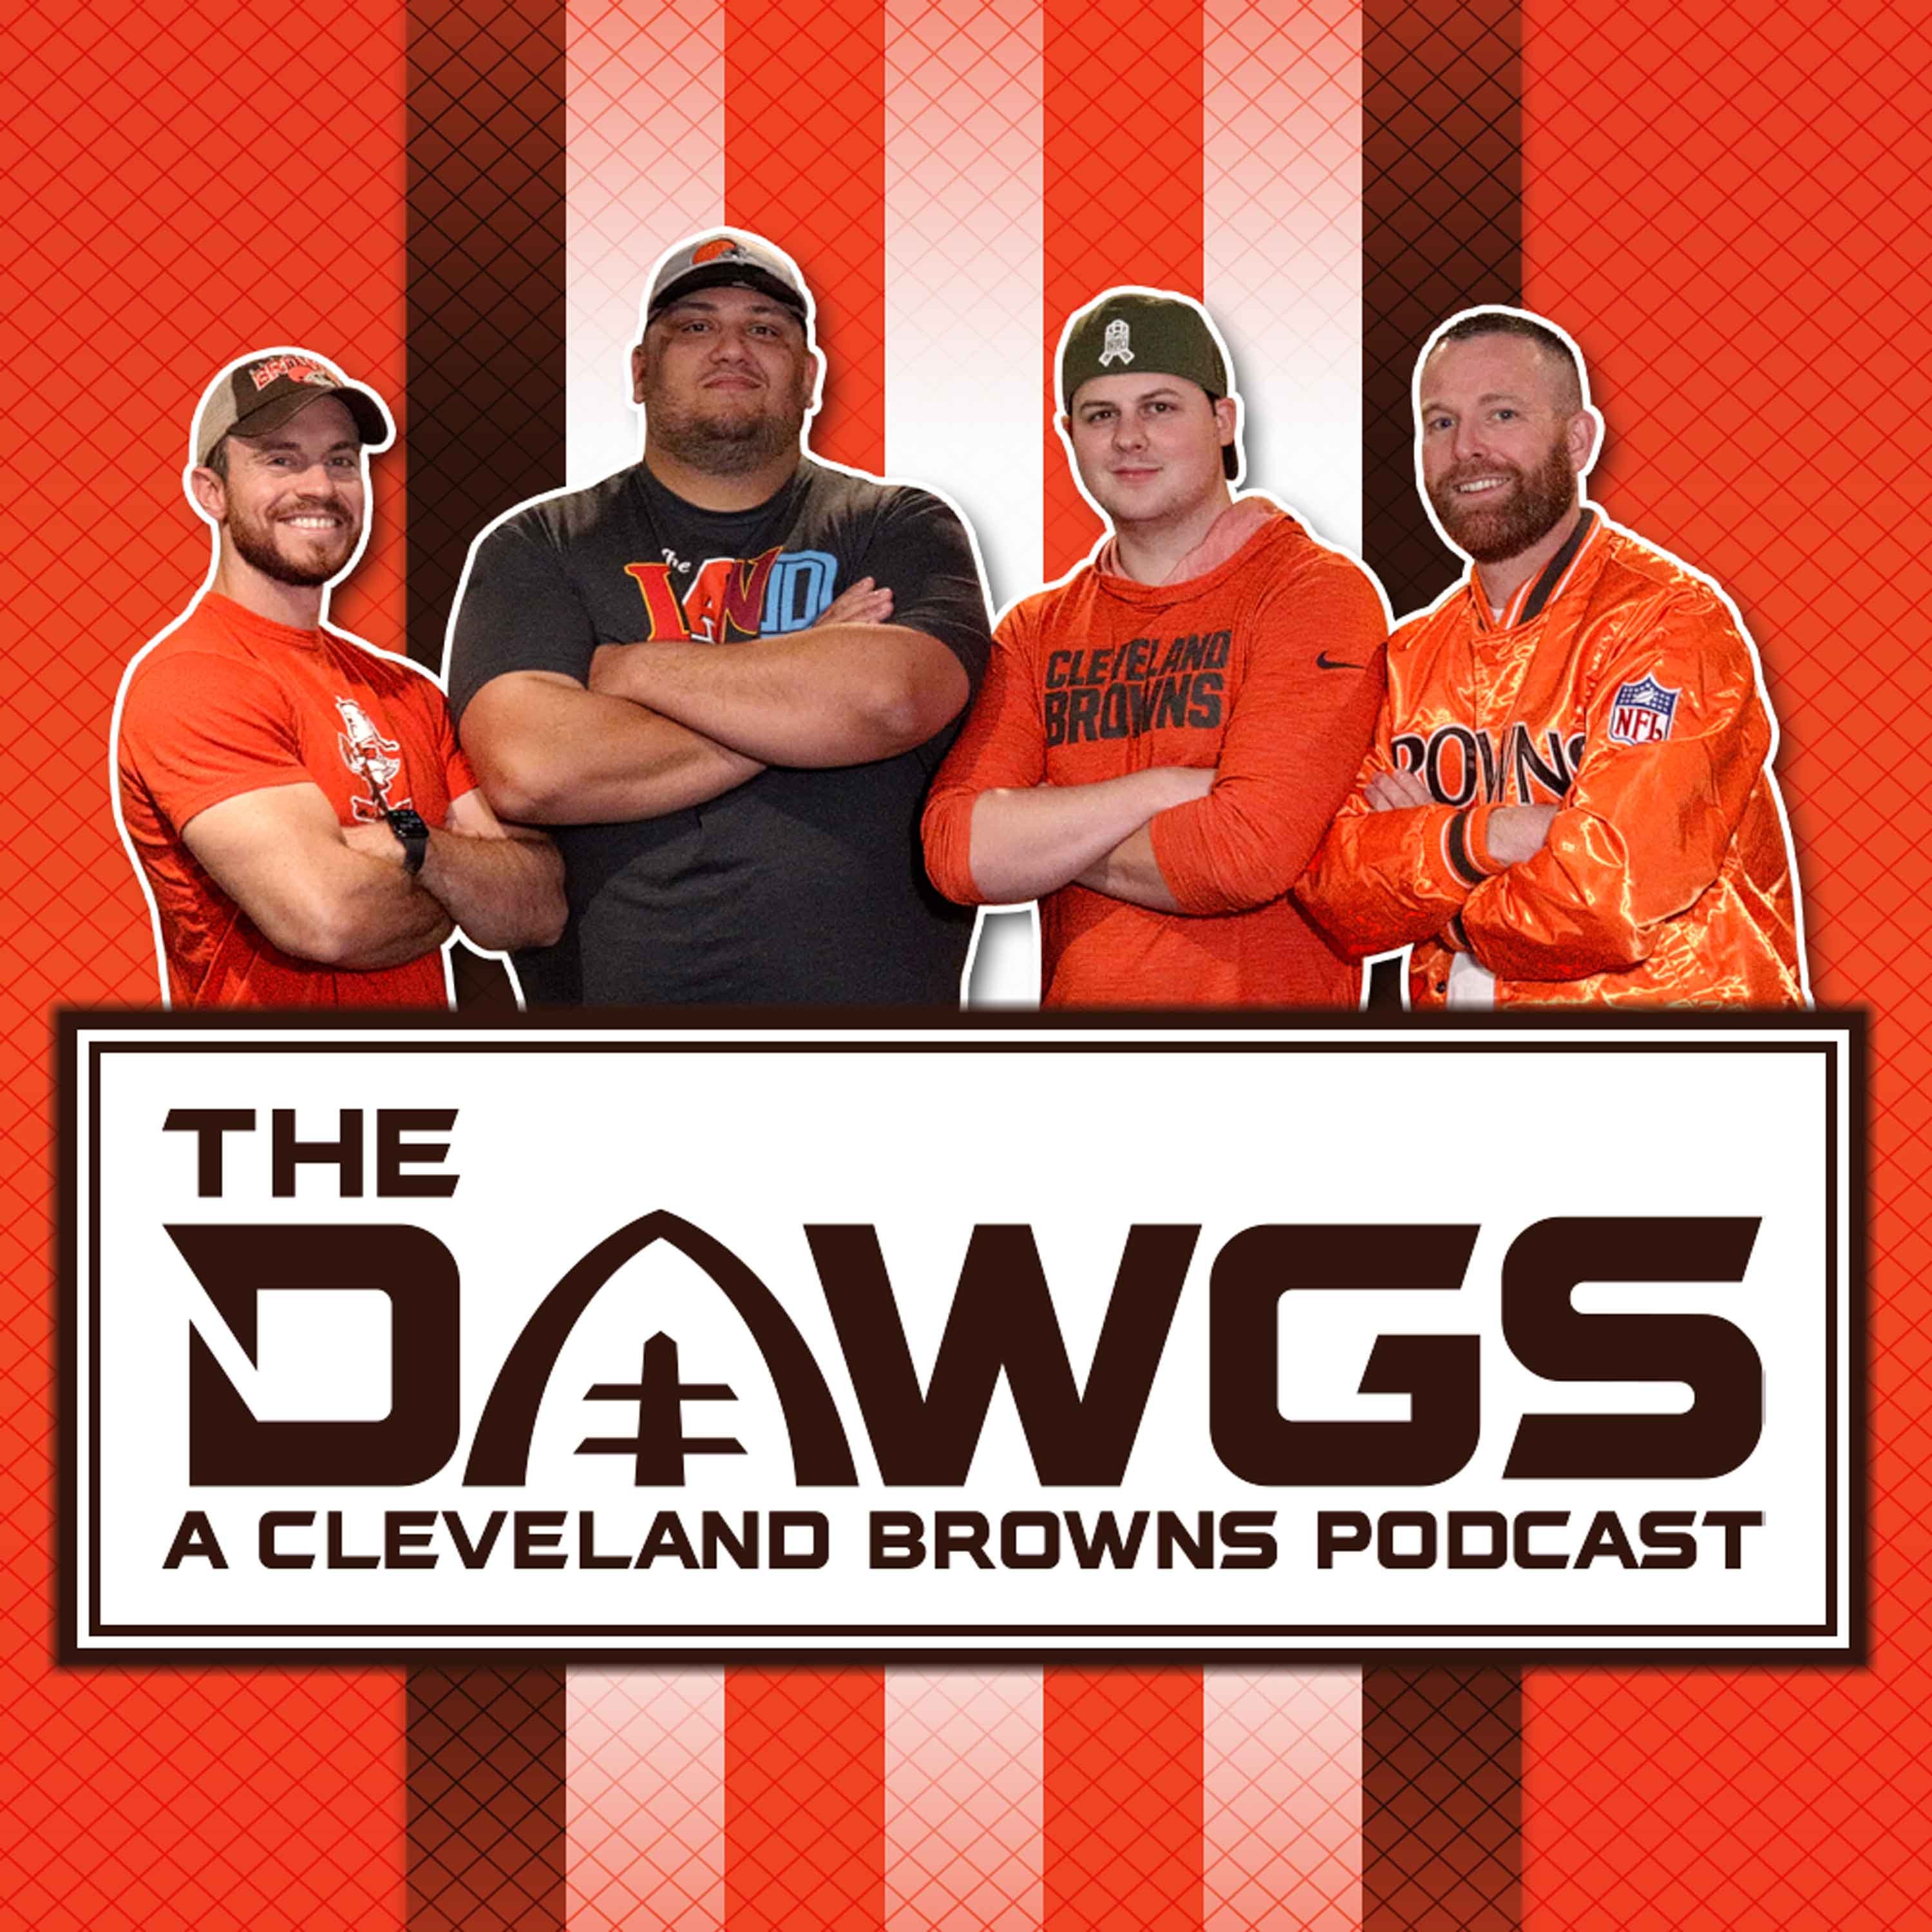 Week 11 Preview - Cleveland Browns at Buffalo Bills  | The Dawgs - A Cleveland Browns Podcast - November 17, 2022